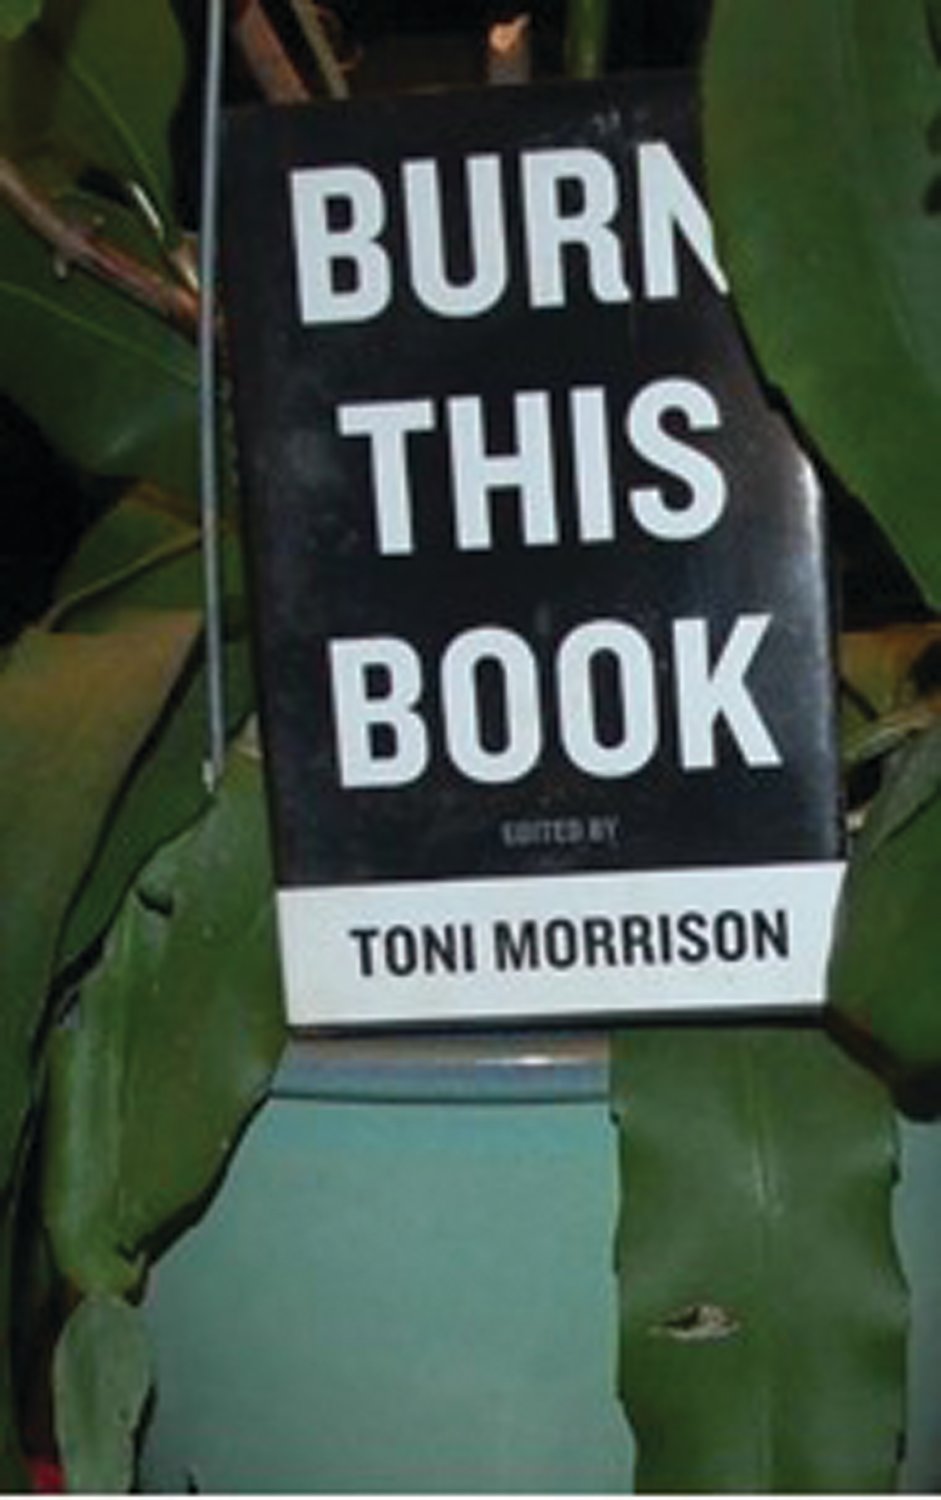 This book of essays on censorship was edited by Toni Morrison.